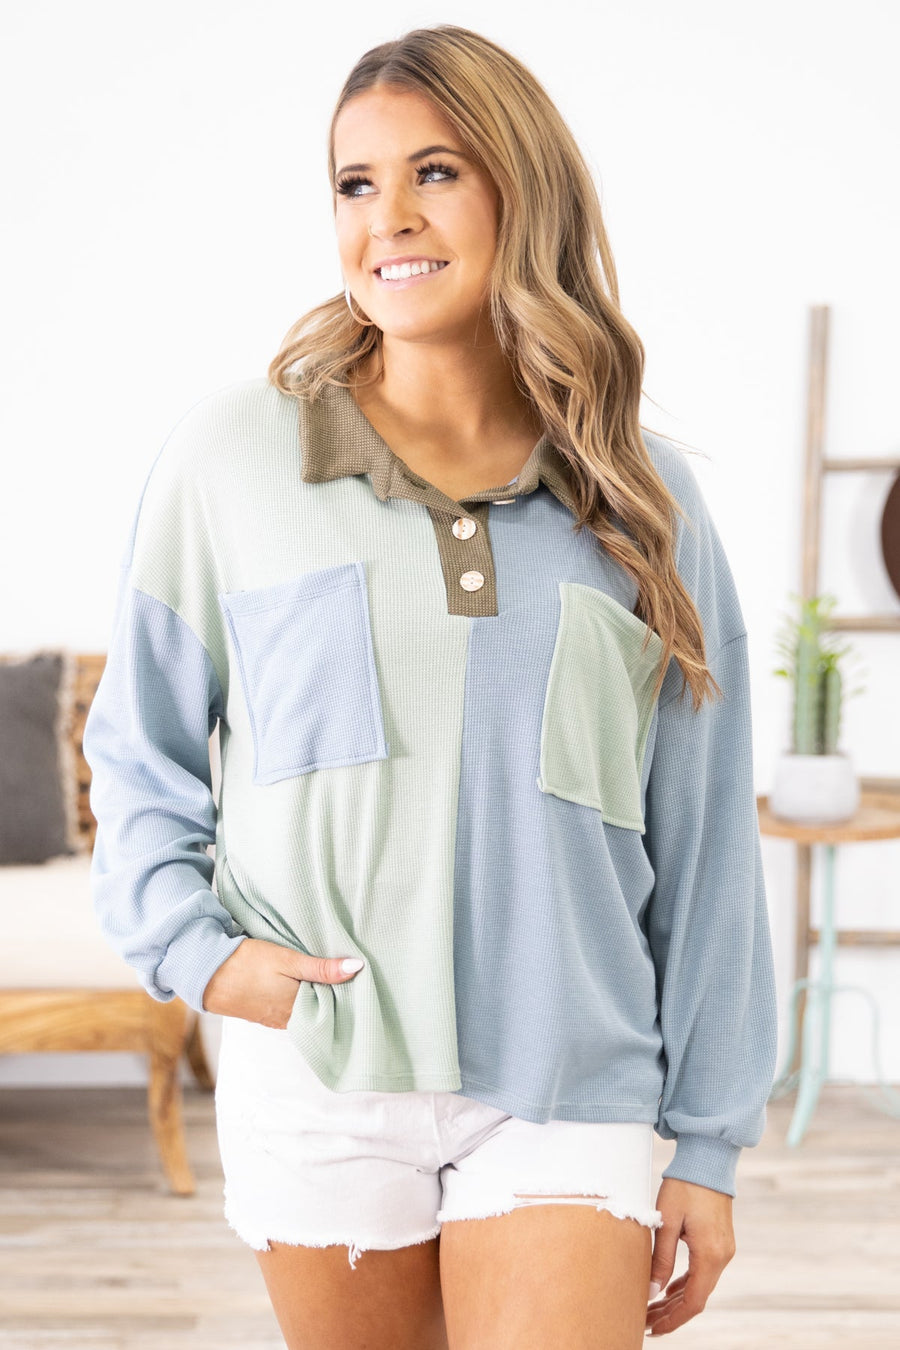 Baby Blue and Mint Colorblock Collared Top - Filly Flair